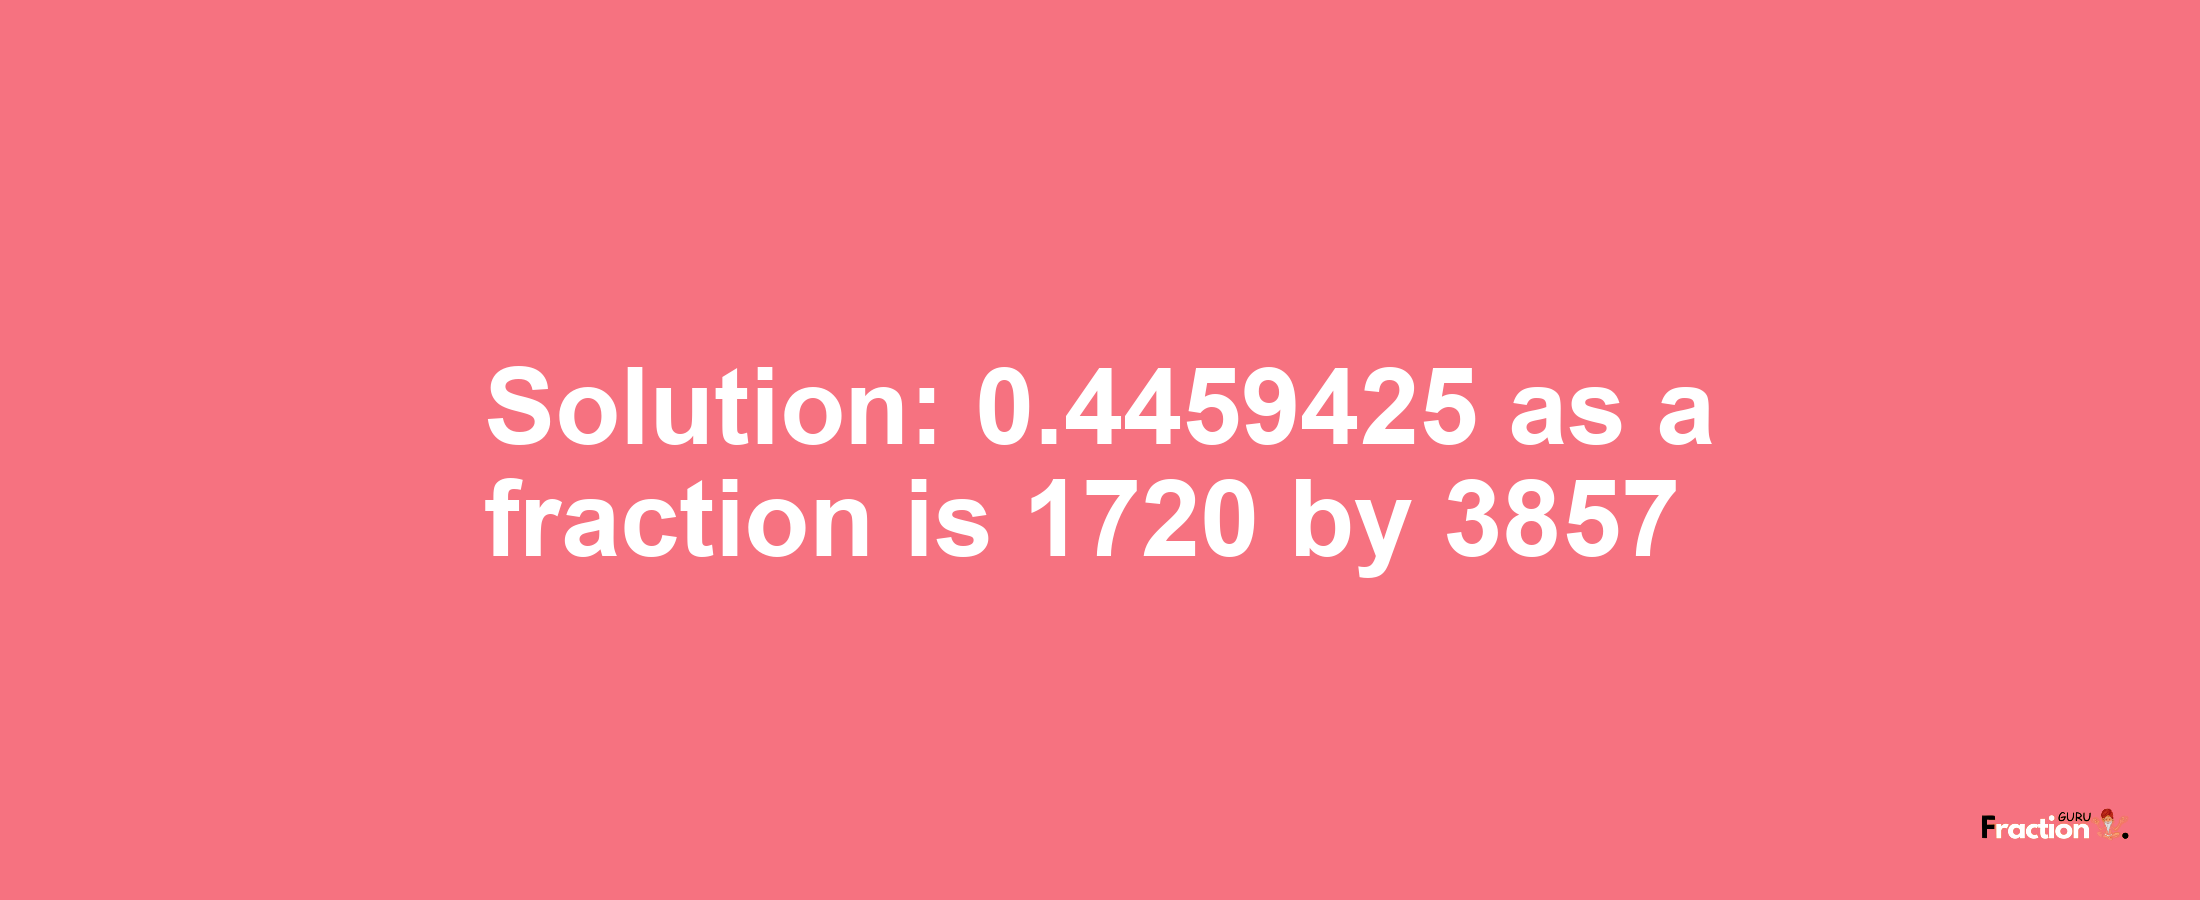 Solution:0.4459425 as a fraction is 1720/3857